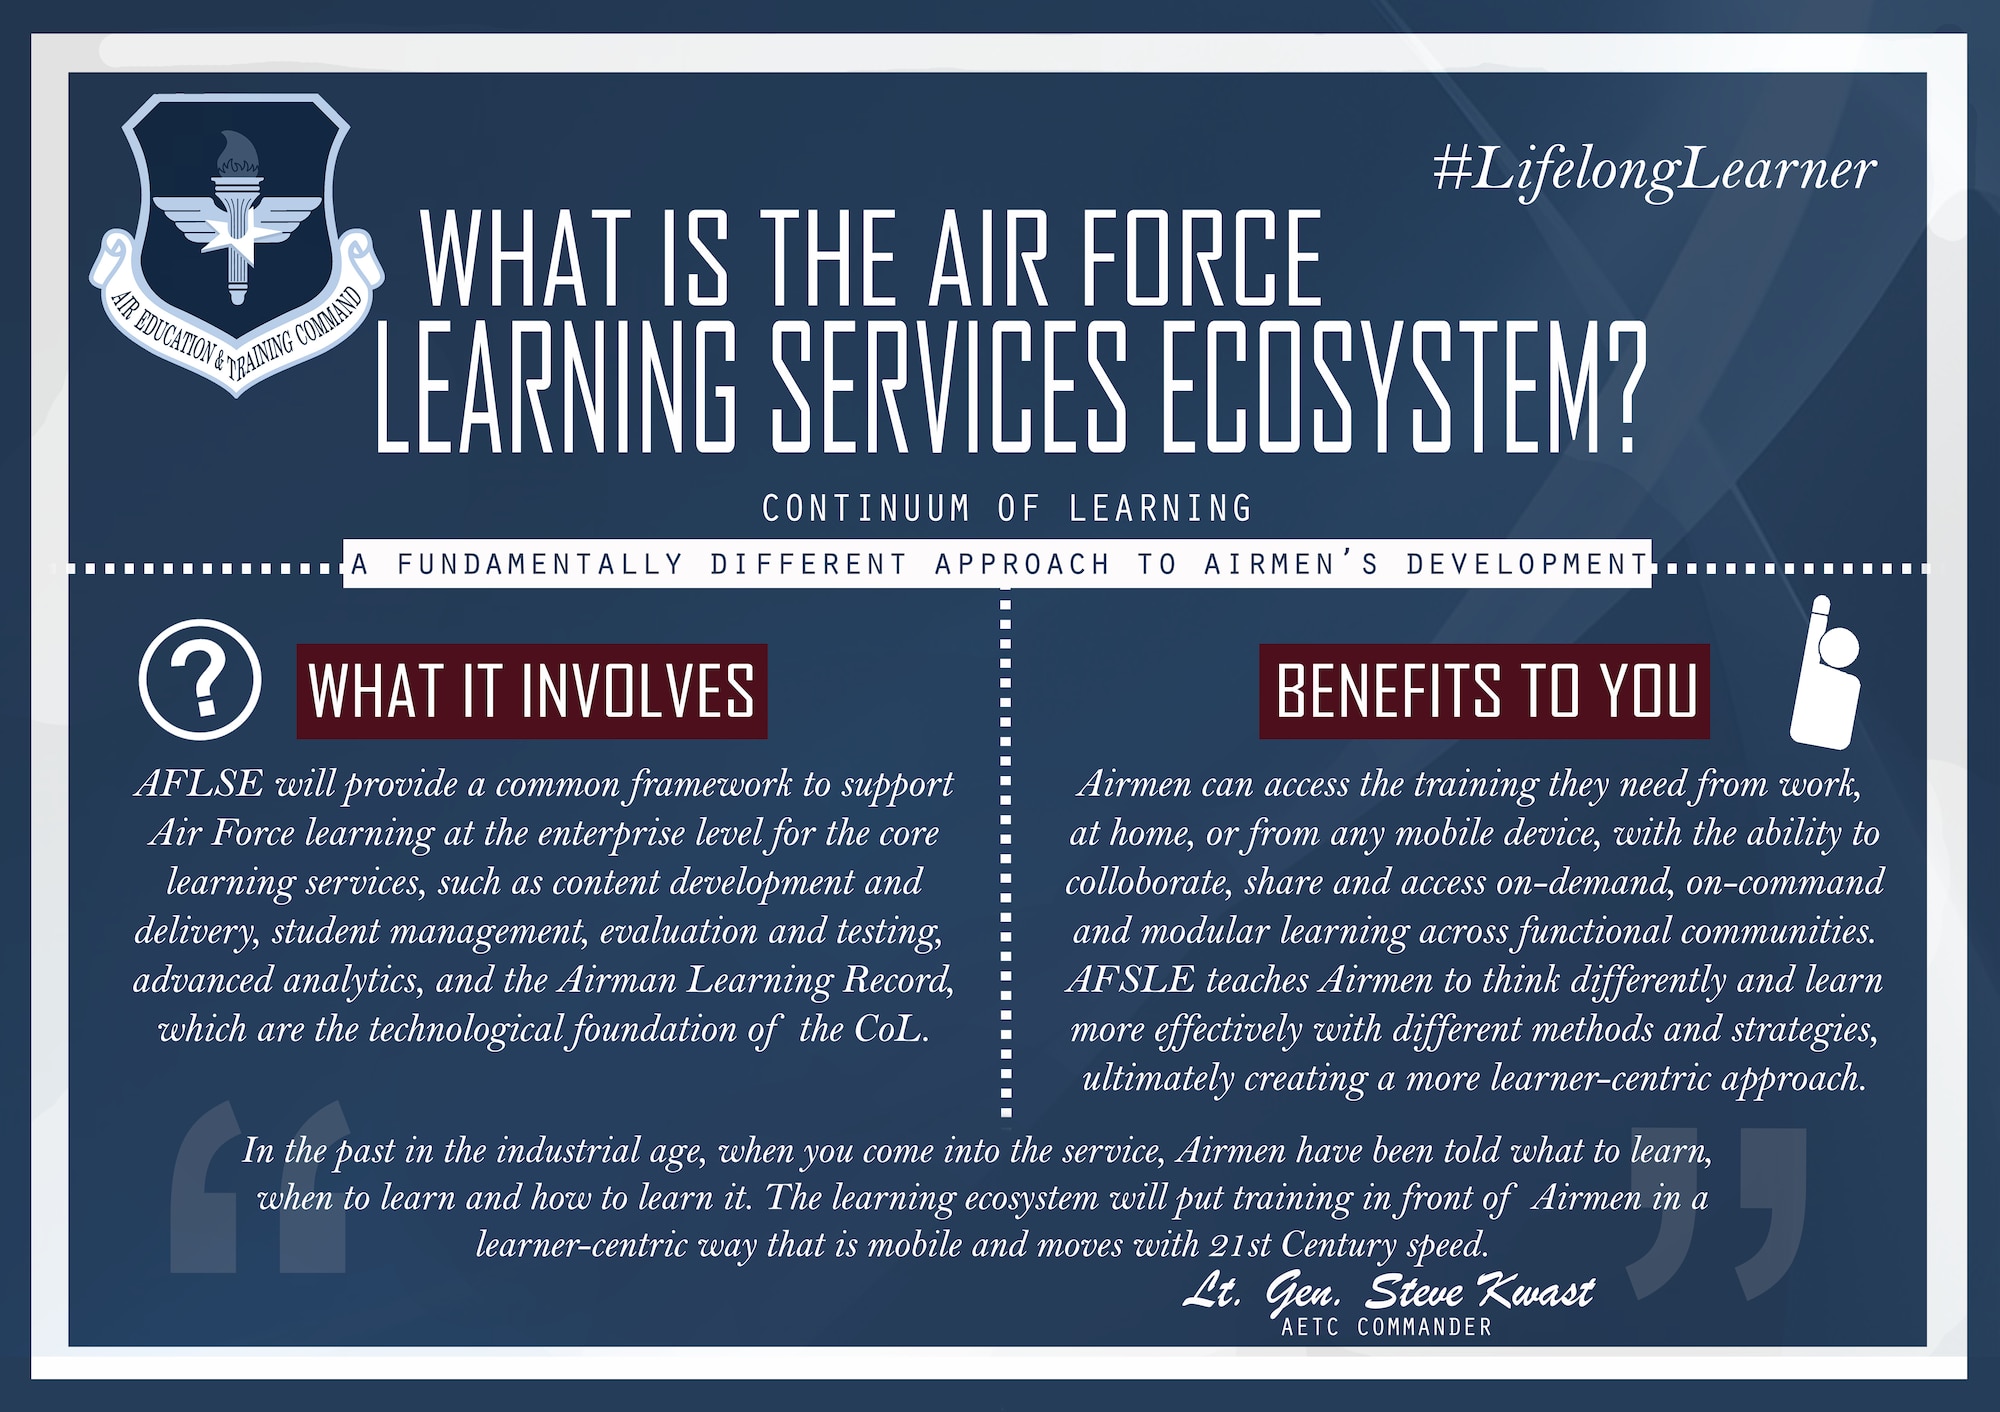 Air Education and Training Command officials announced the service’s new cloud-based learning ecosystem is currently in a beta test with four courses, with testing expected to complete in the summer of 2019 and full operational capability expected in early 2020. (U.S. Air Force graphic by Staff Sgt. Chip Pons)